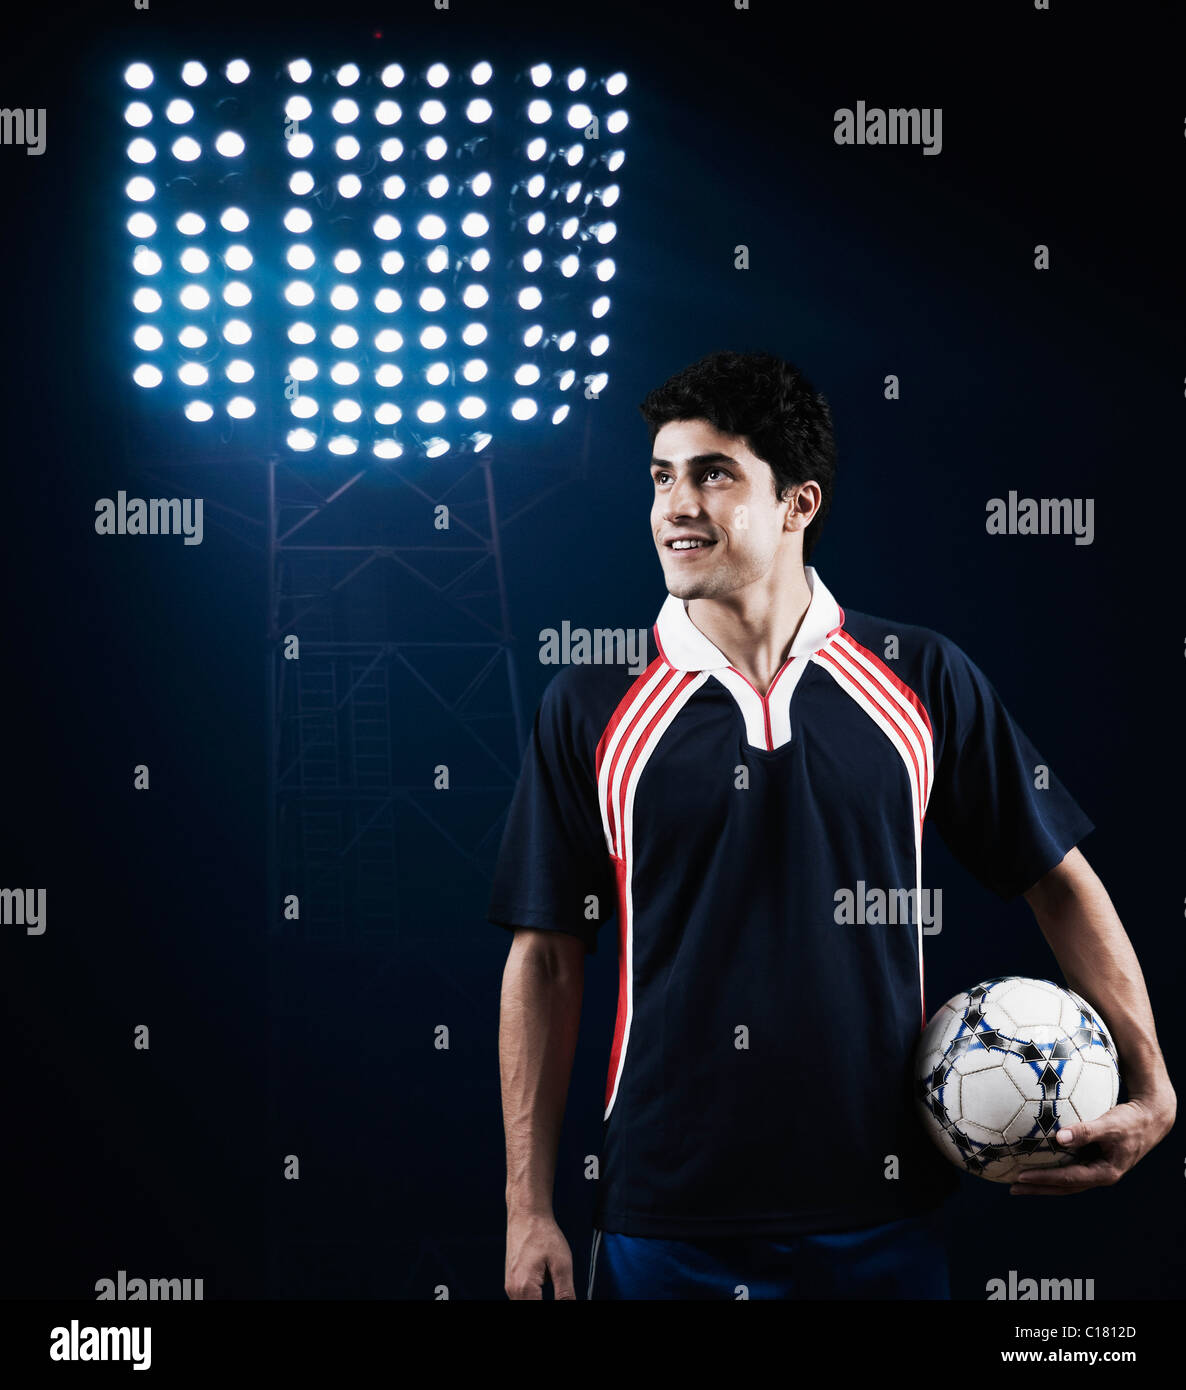 Soccer player holding a soccer ball and smiling Stock Photo